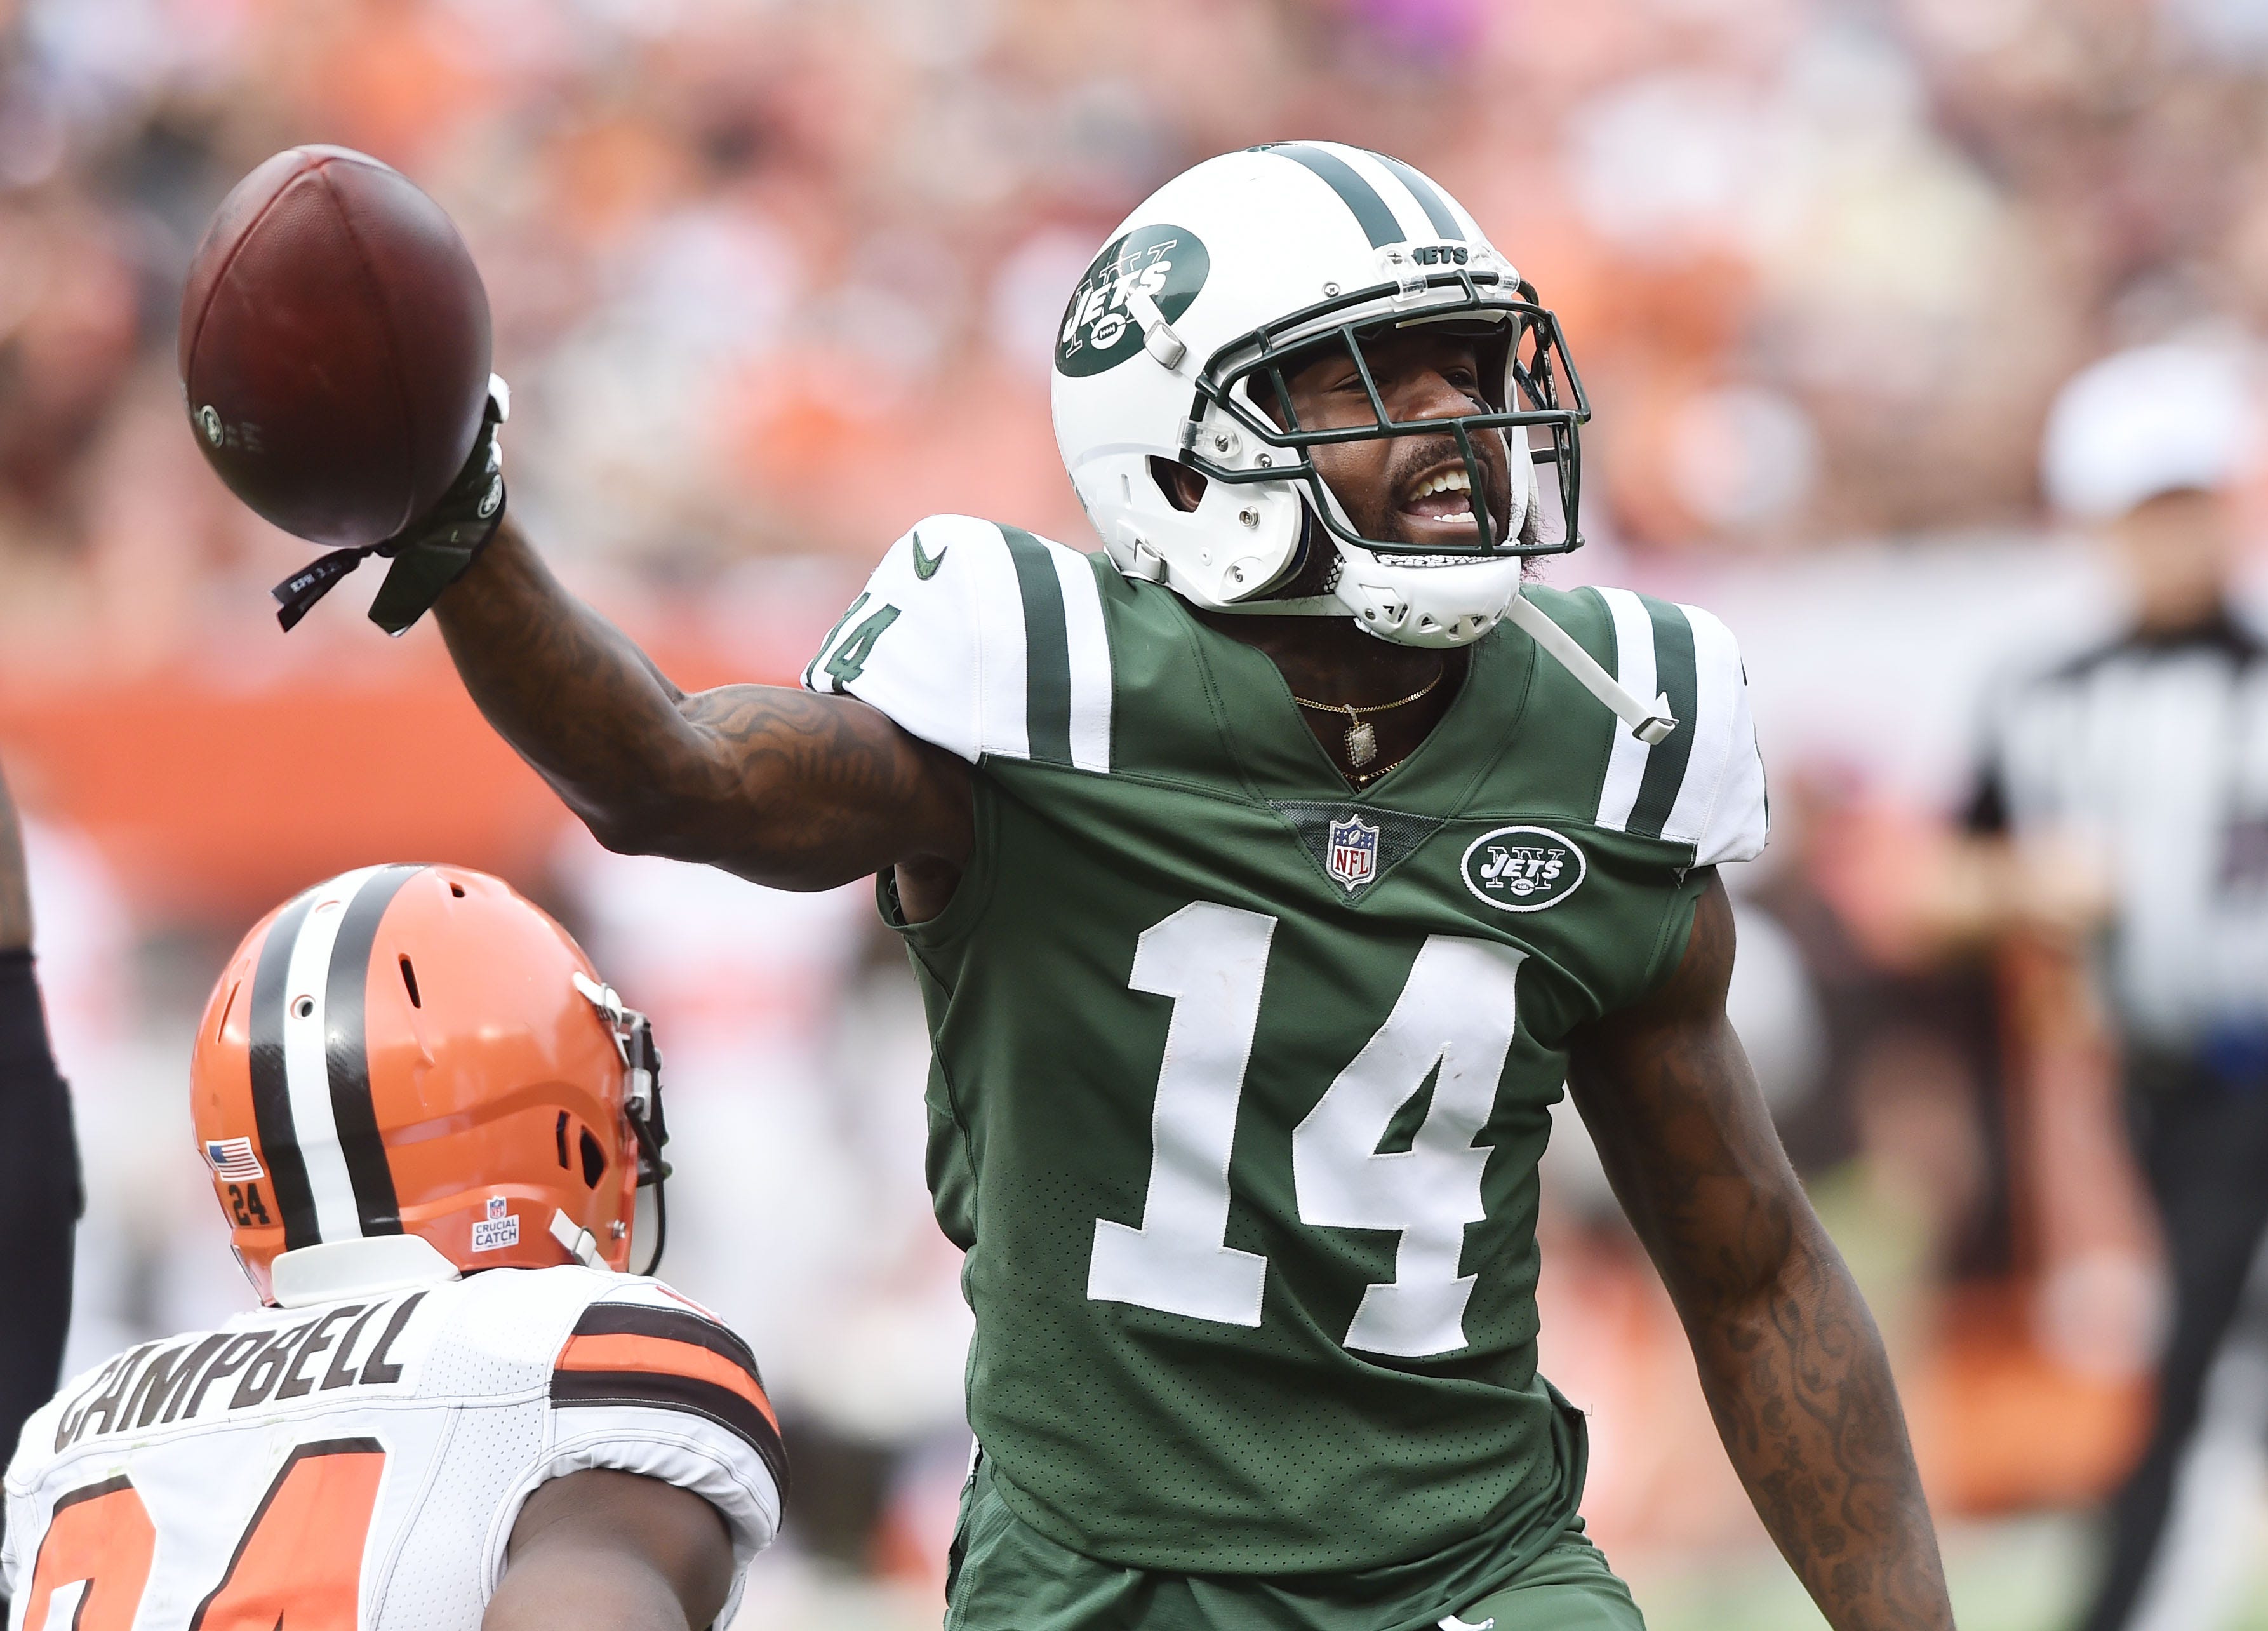 Jets WR Jeremy Kerley can't explain PED suspension, says 'ghost' may be to blame